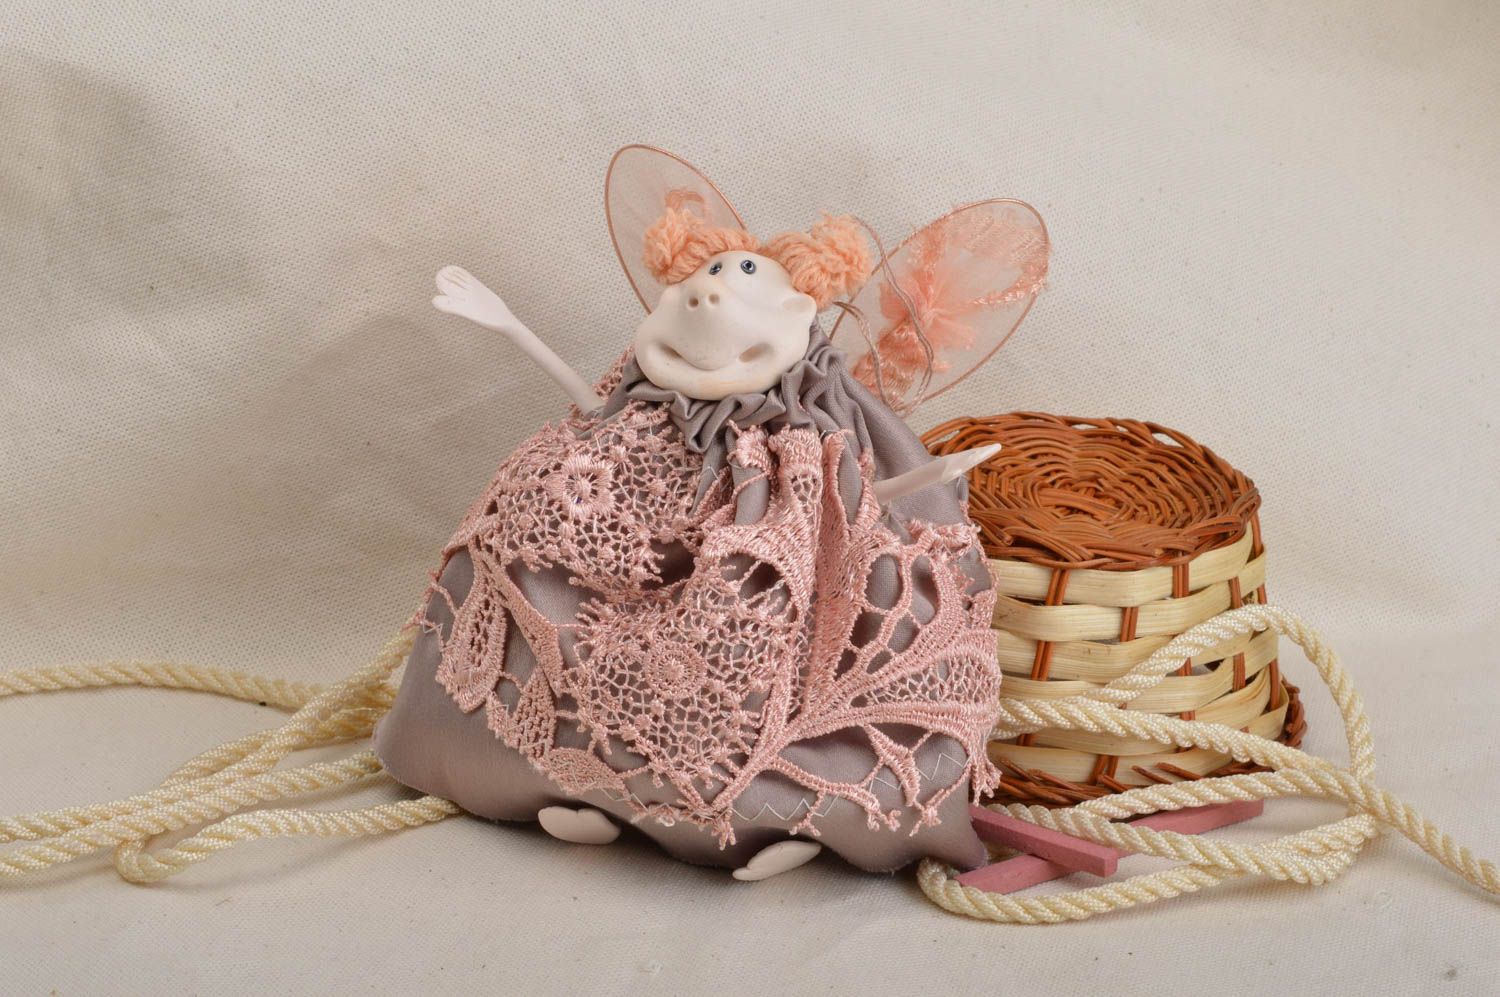 Unusual stylish handmade designer toy for decor made of clay and cotton photo 1